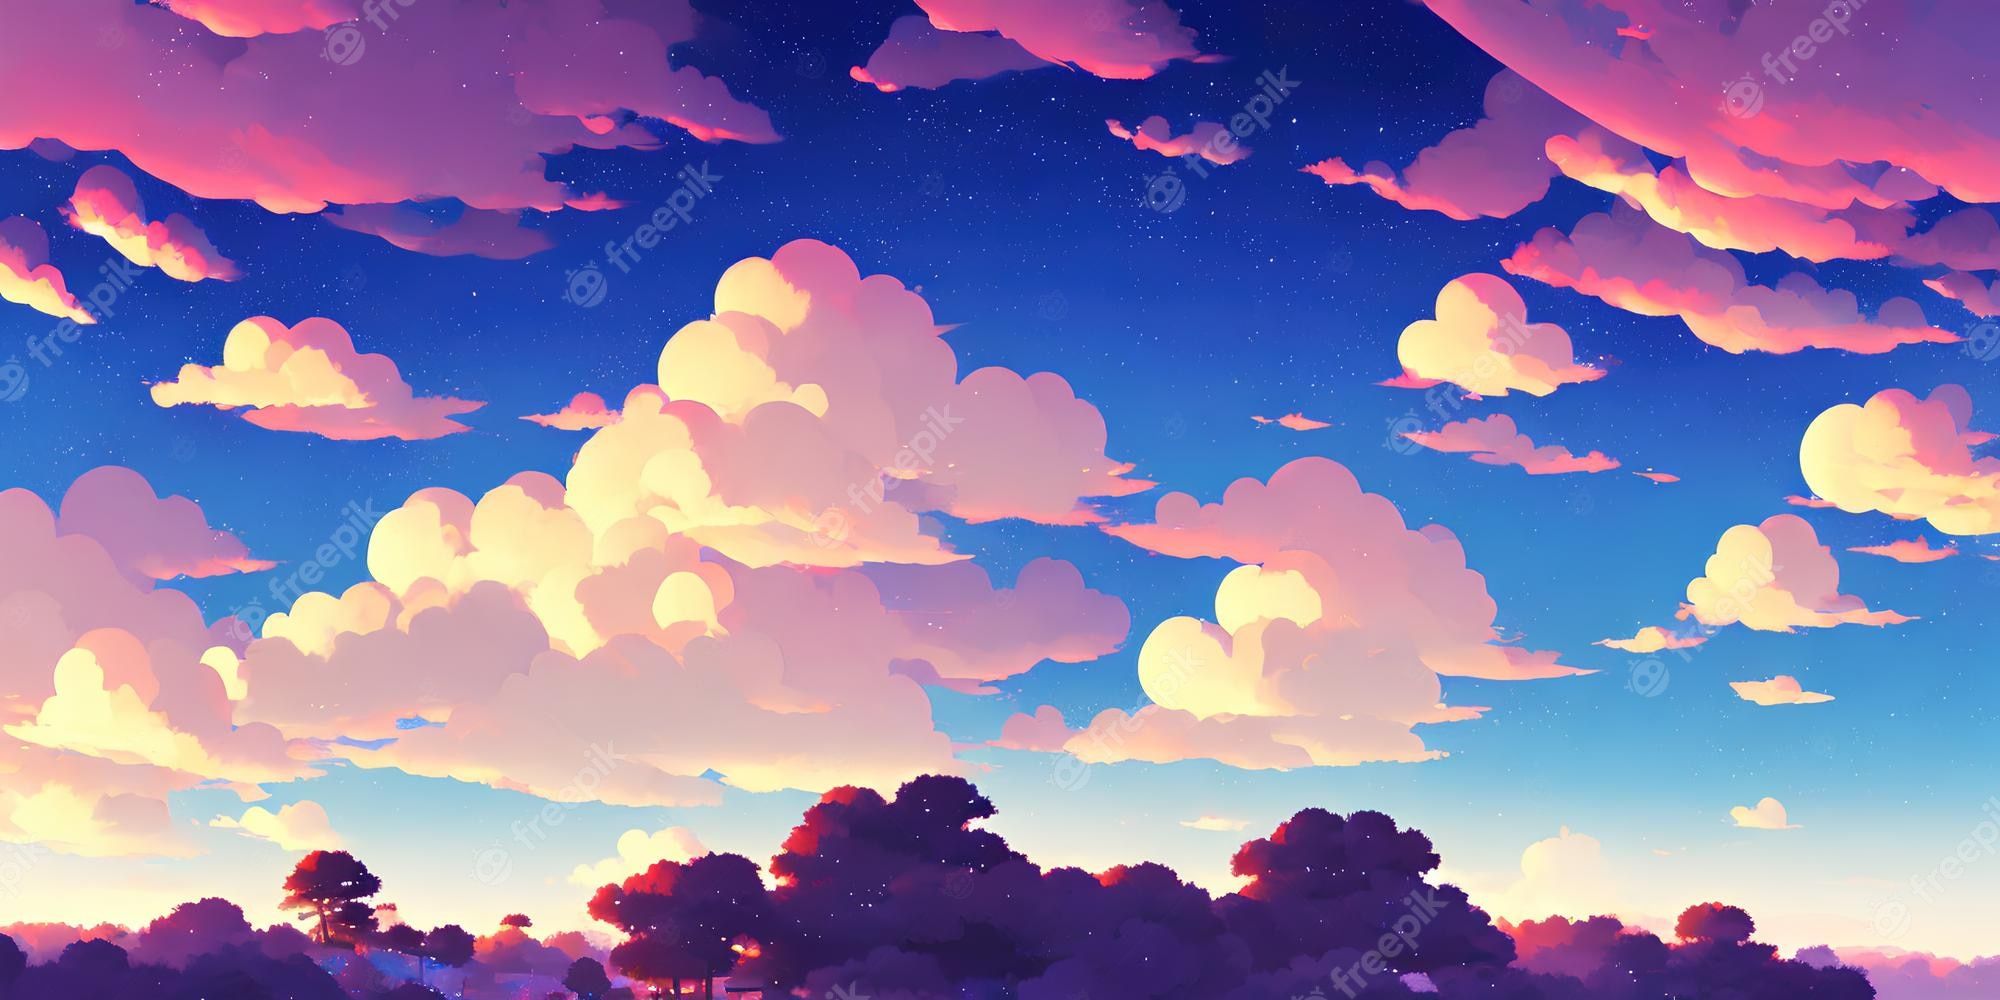 Illustration of pink clouds in the blue sky - Anime landscape